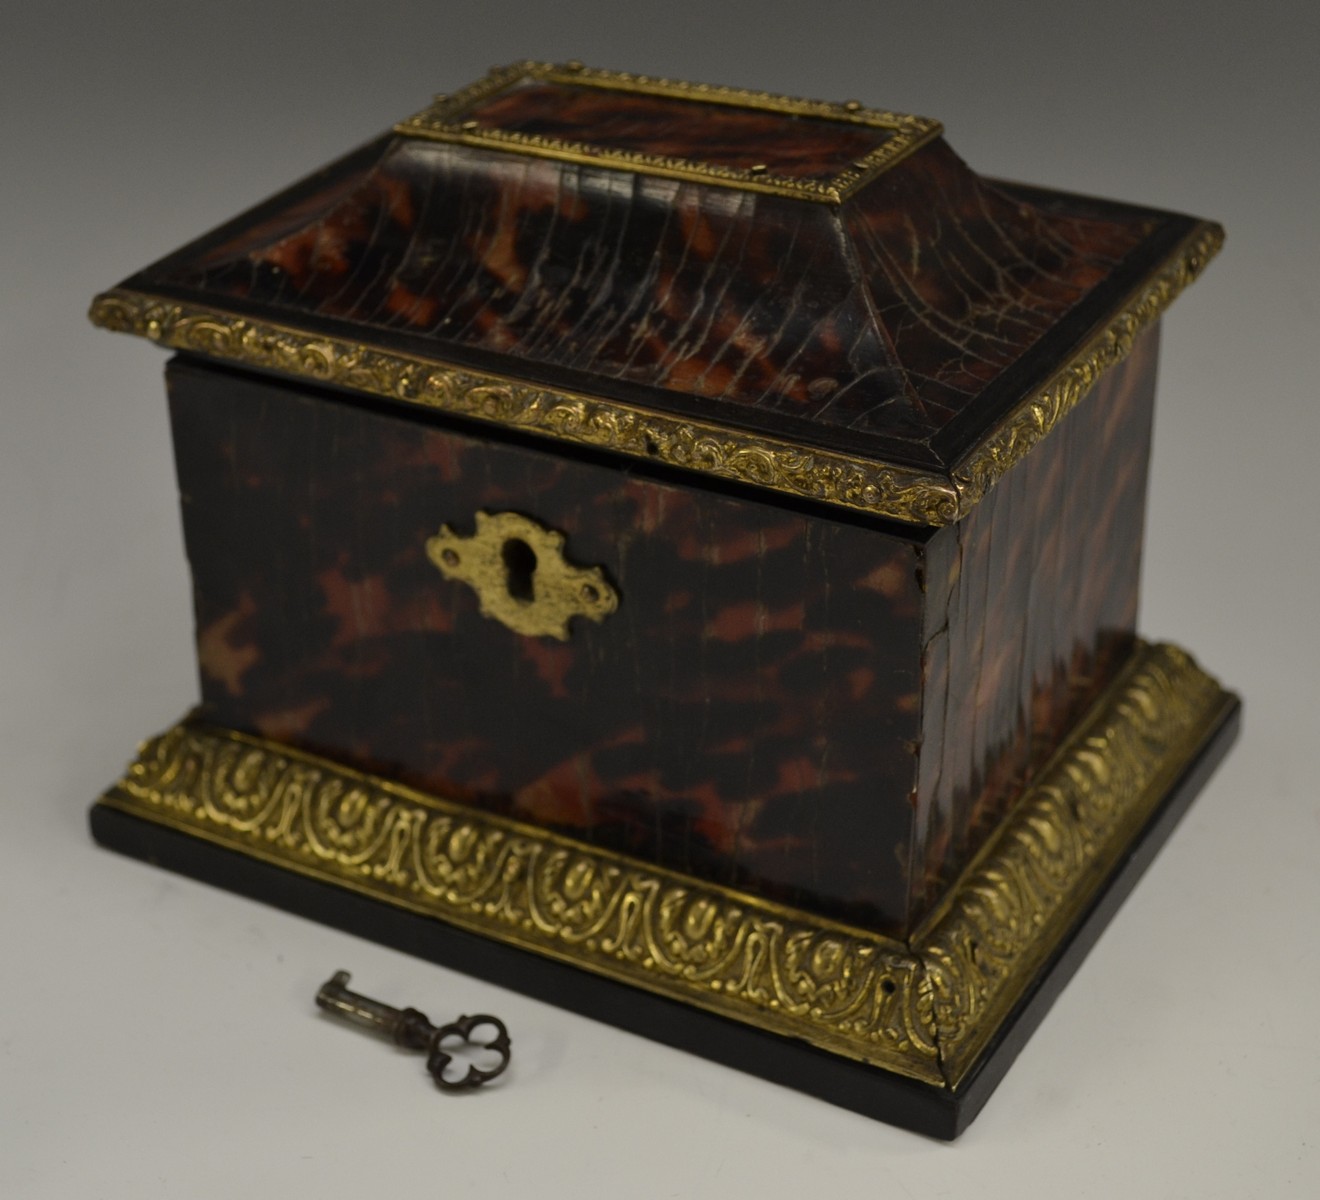 A 19th century European gilt metal mounted tortoiseshell casket, hinged sarcophagus cover, - Image 2 of 4